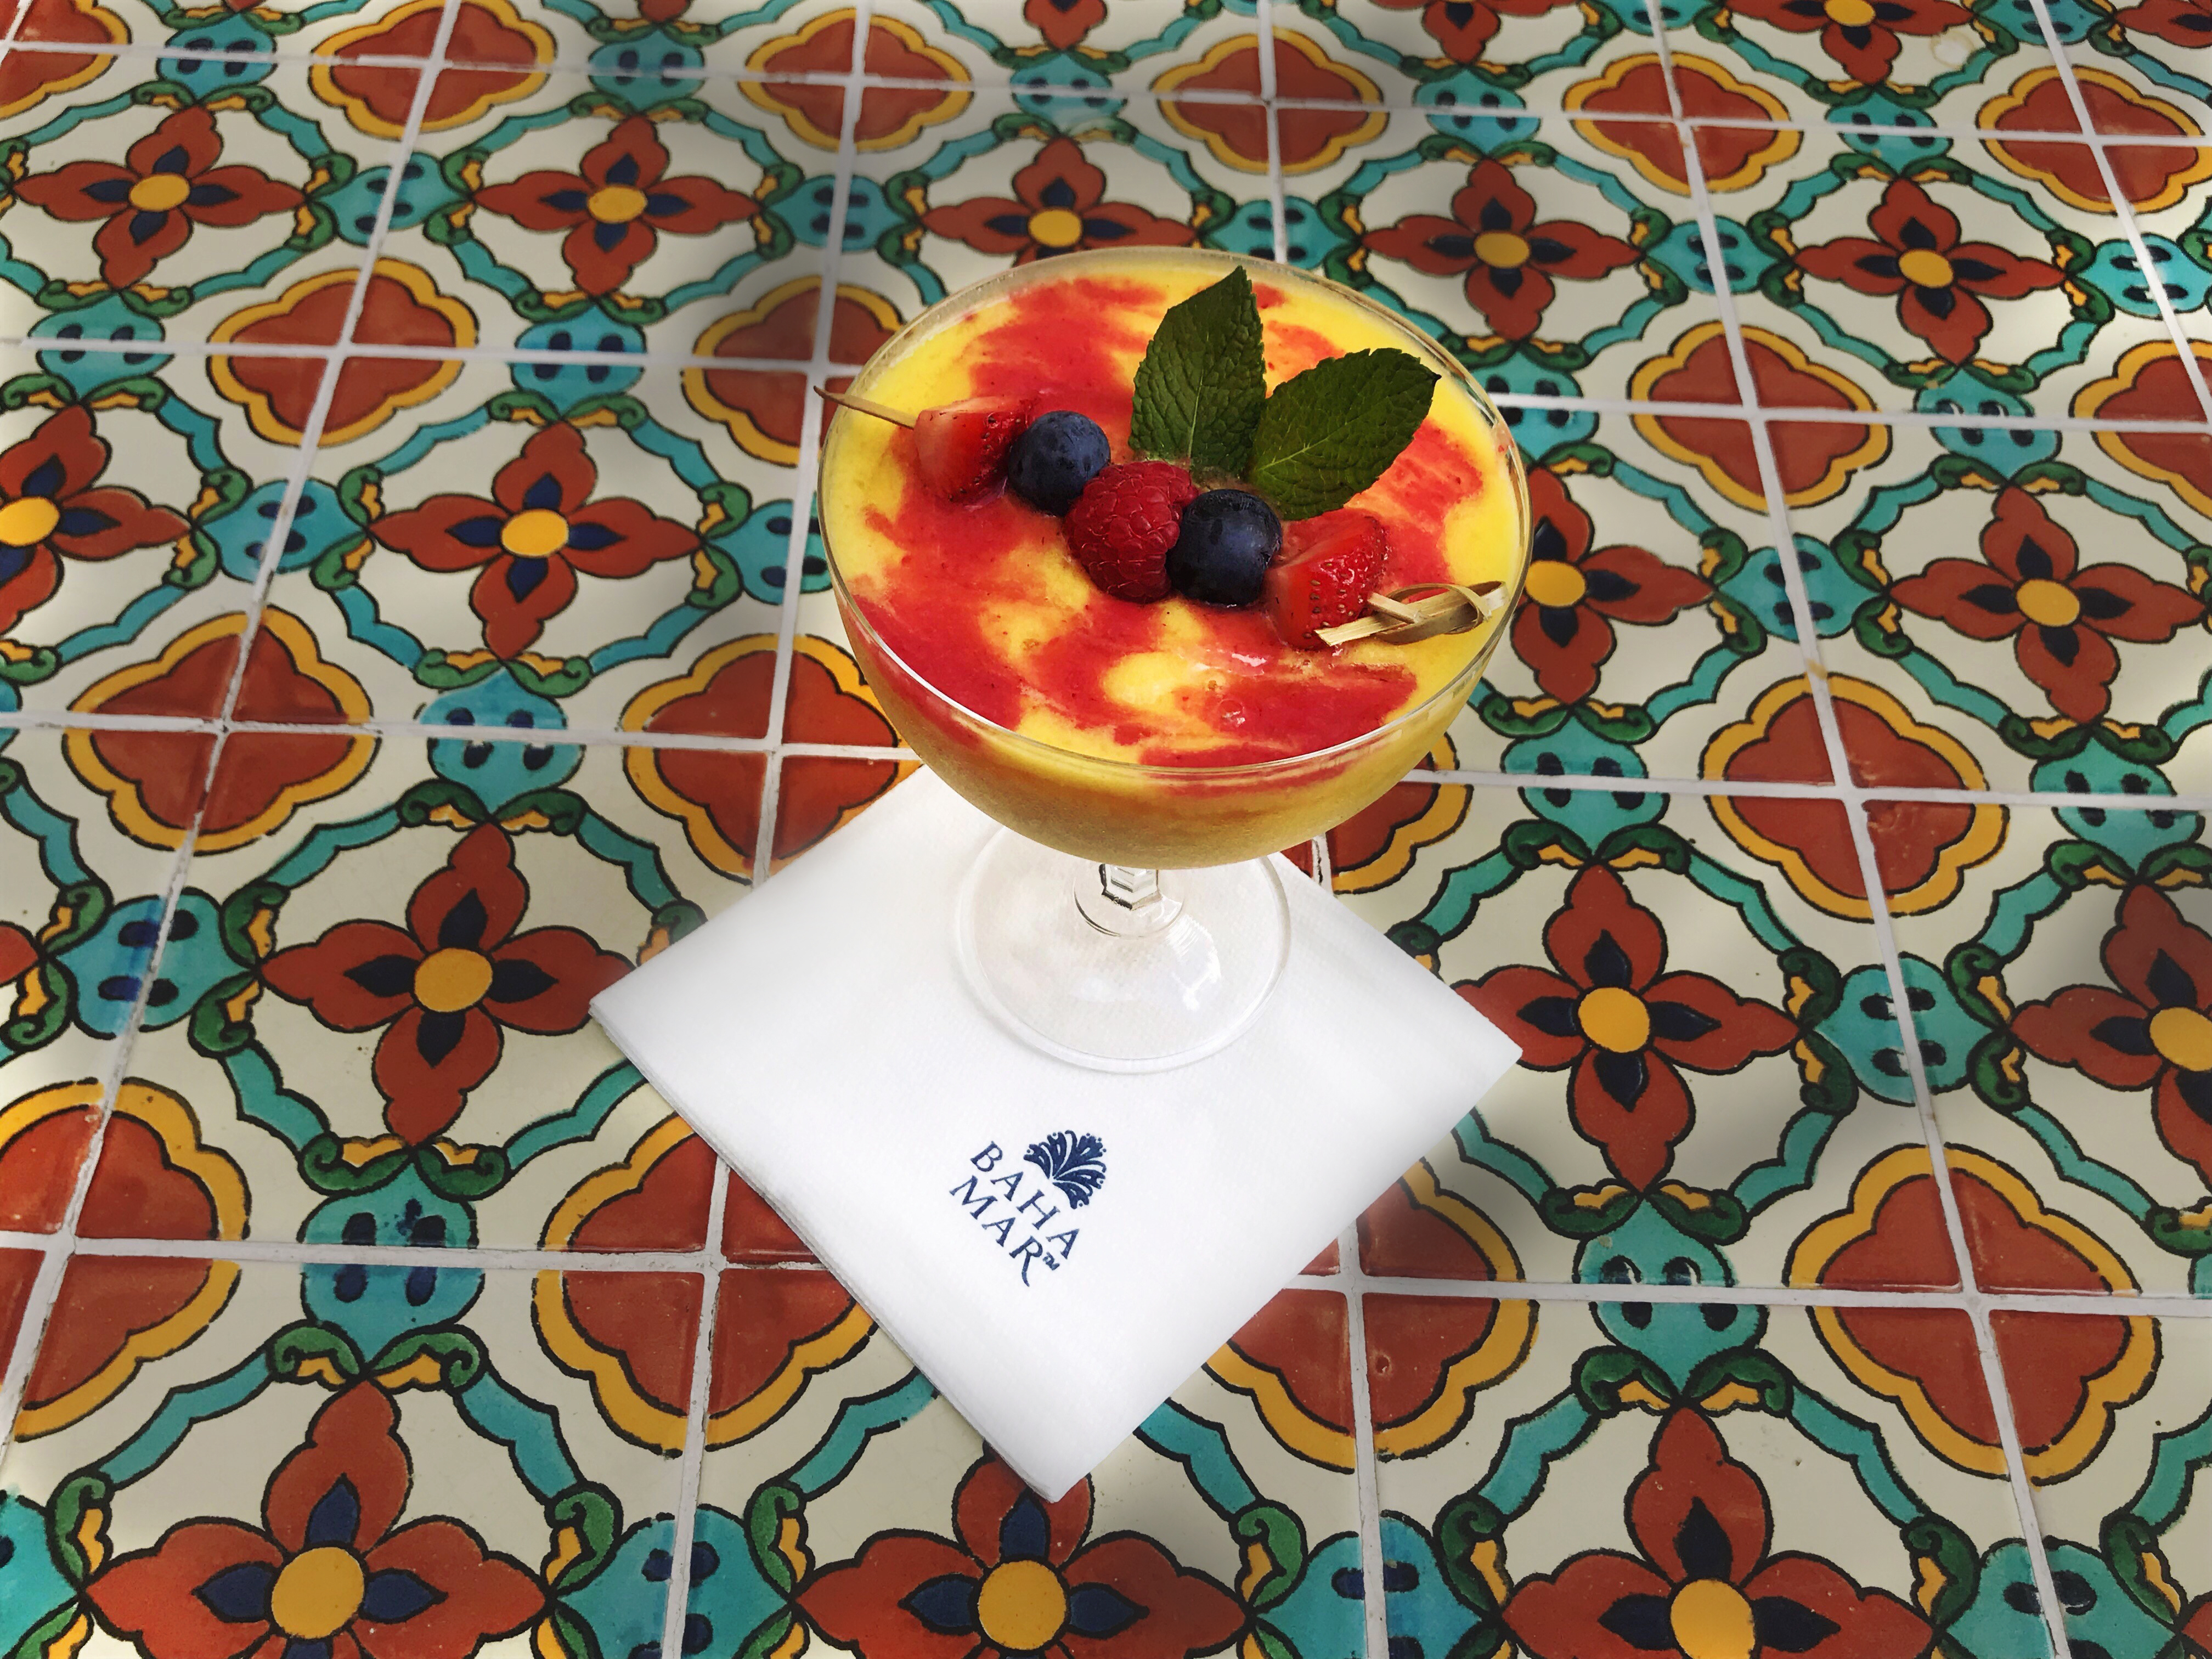 This refreshing twist on the mimosa is served at Grand Hyatt Baha Mar the Bahamian property’s Café Madeleine.